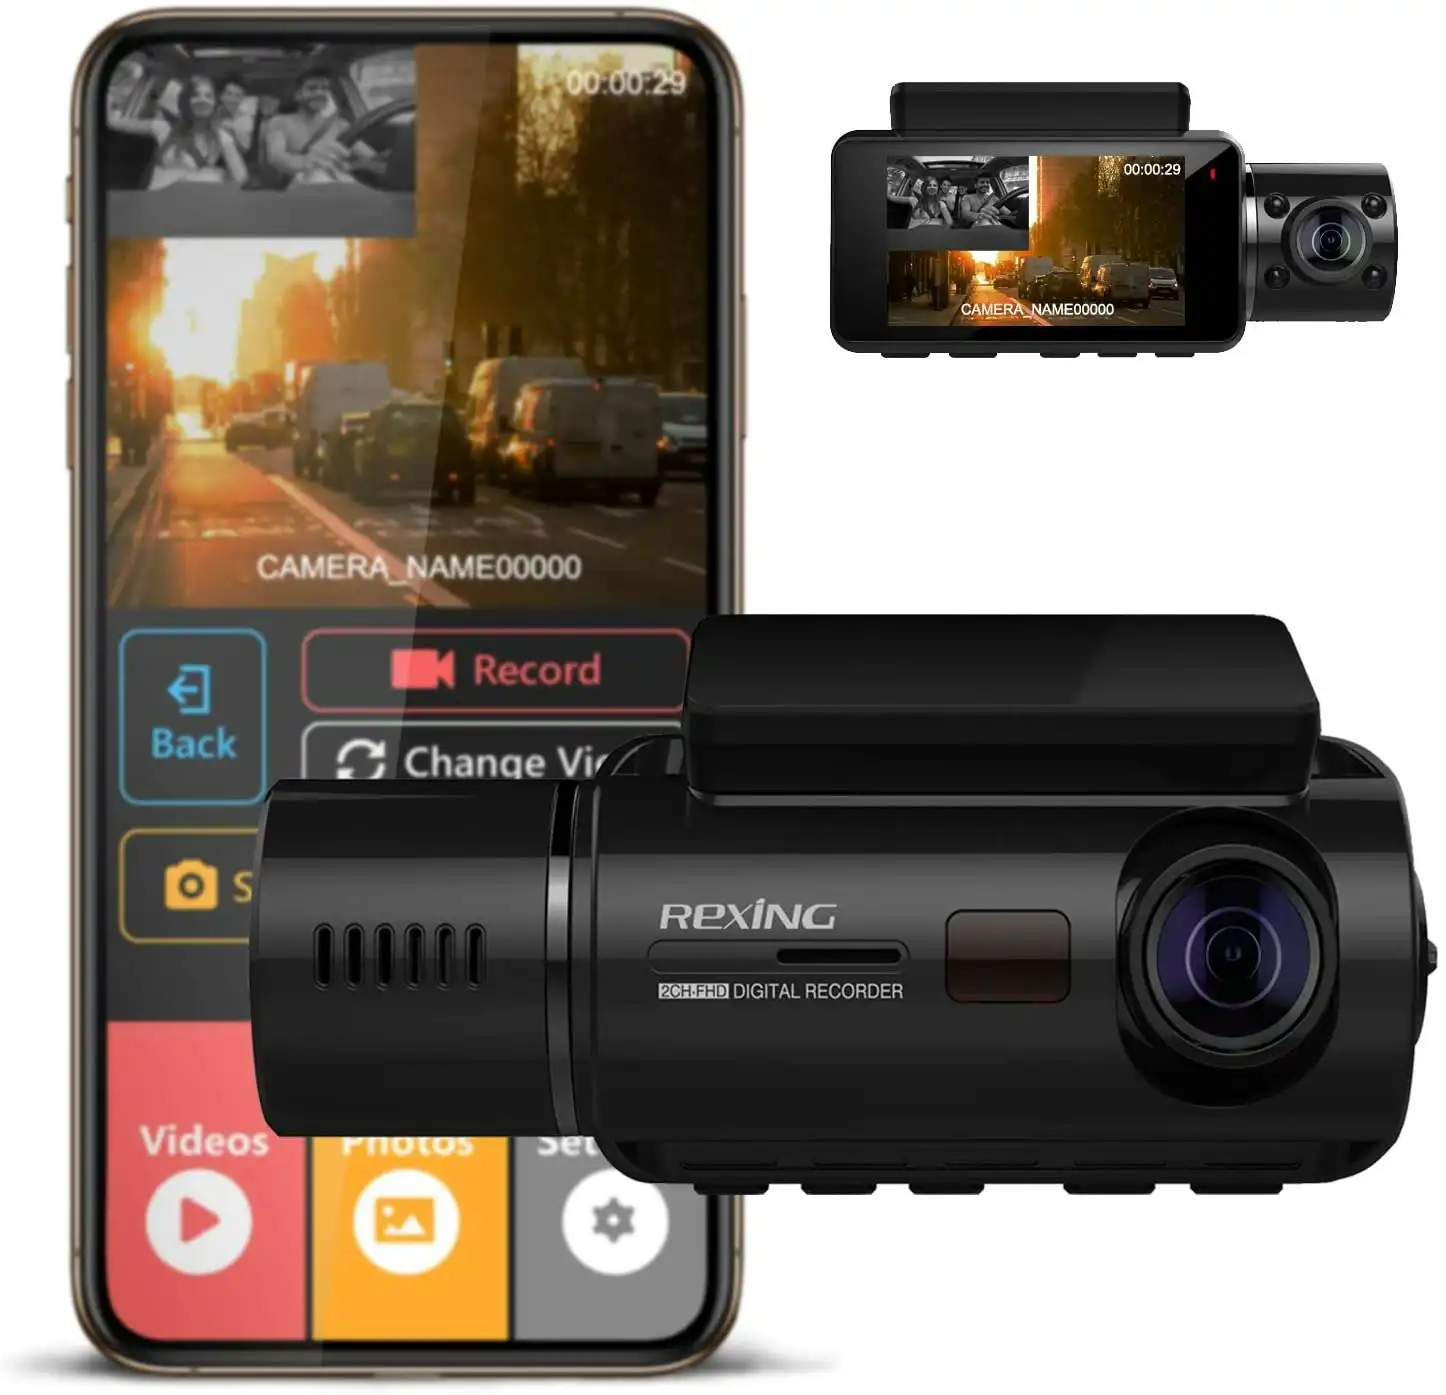 Rexing V3 Basic Dual Camera Front and Inside Cabin Infrared Night Vision Full HD 1080p WiFi Car Taxi Dash Cam with Supercapacitor, 2.7" LCD Screen, Pa